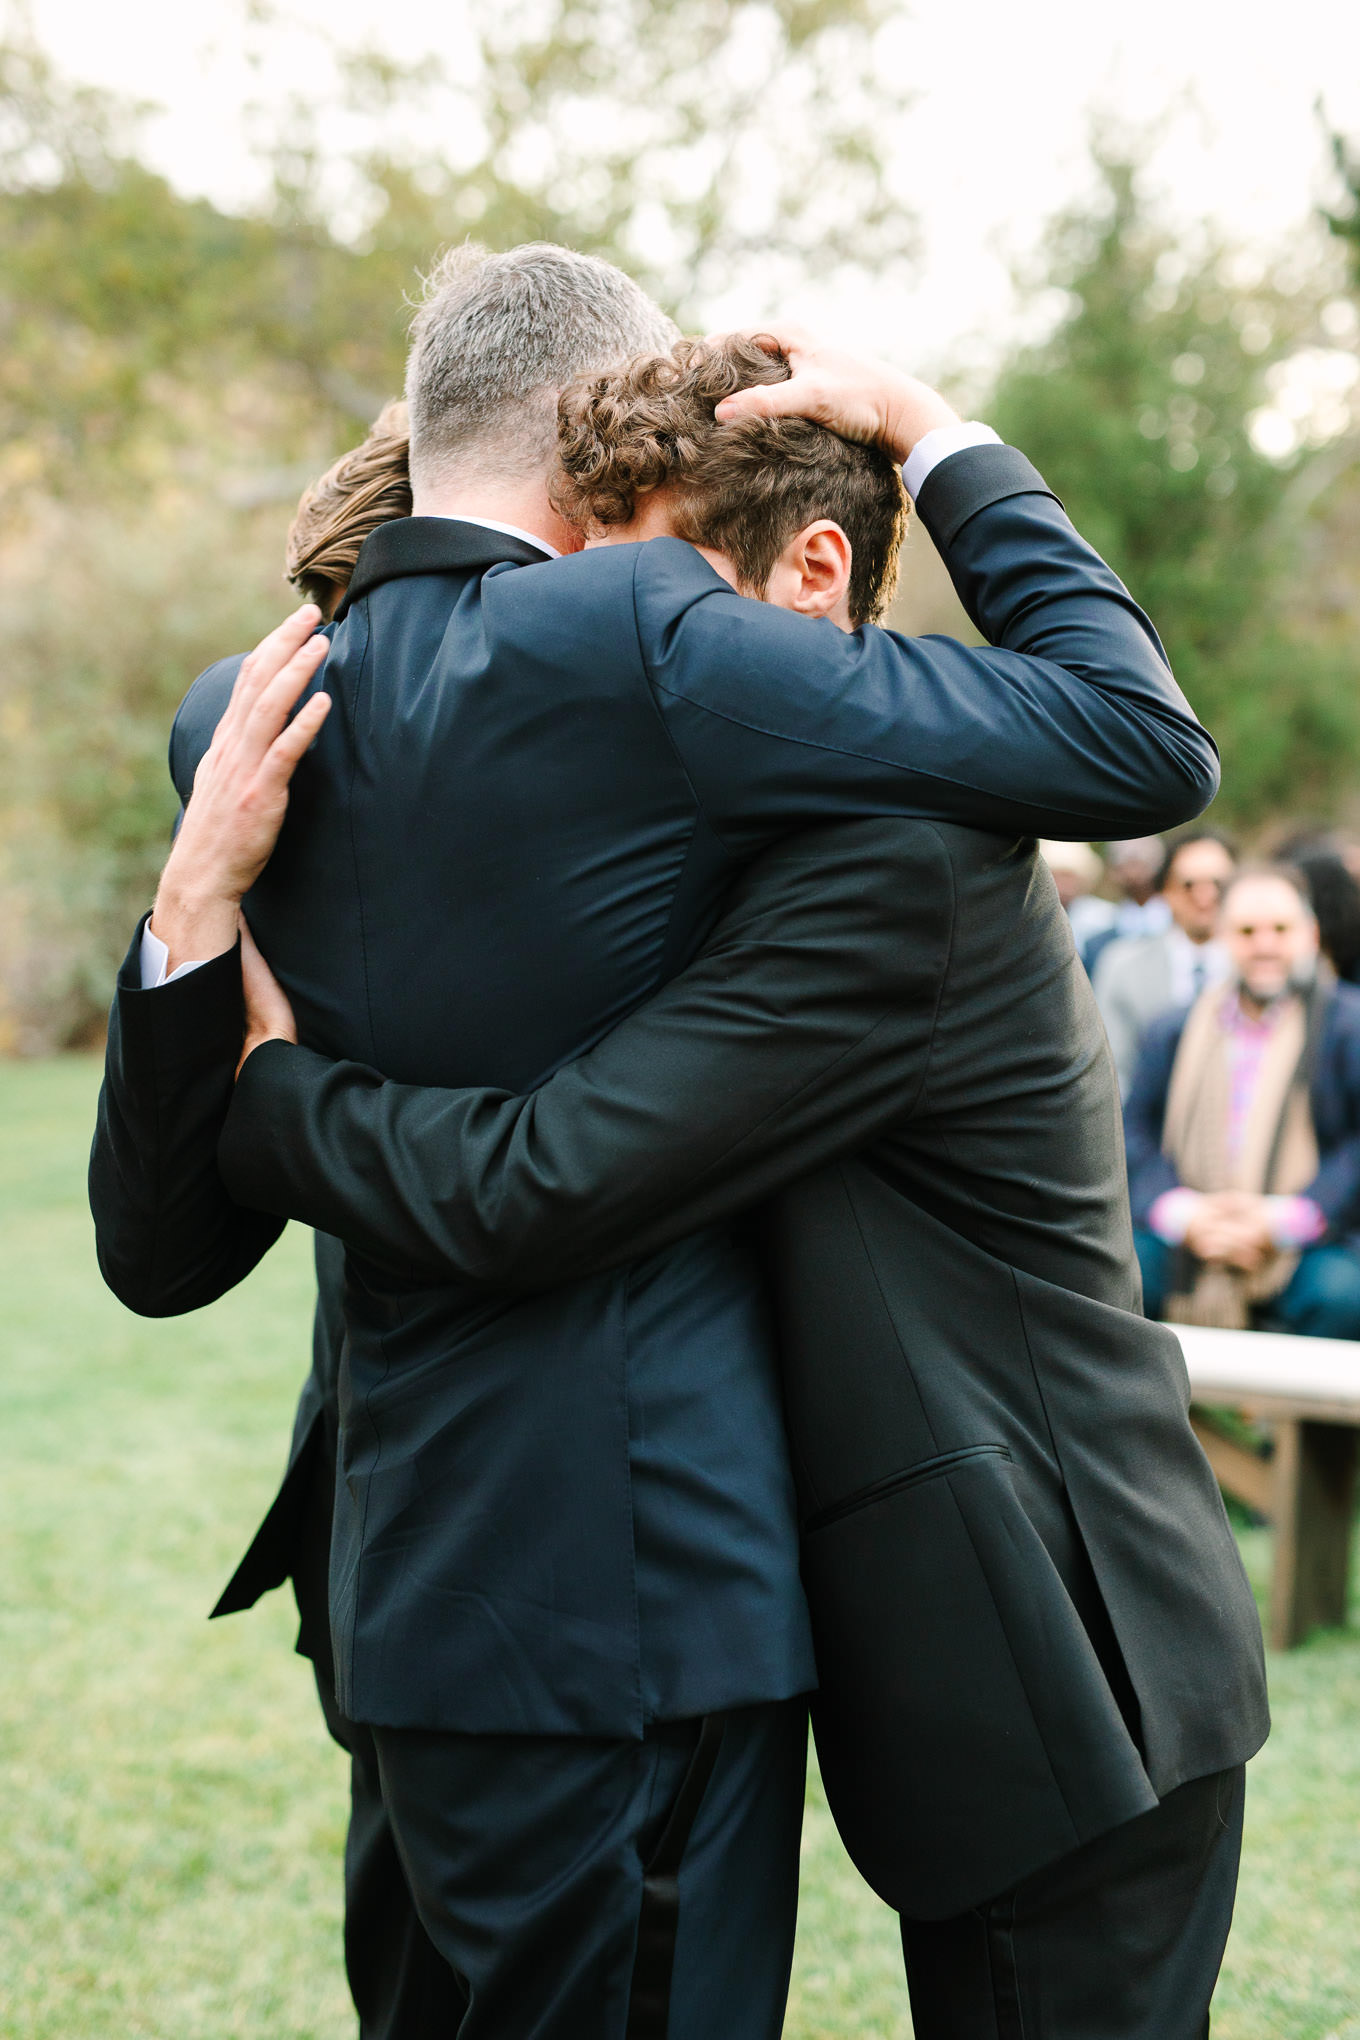 Heartfelt hug between groom and brothers at wedding ceremony | Colorful and quirky wedding at Higuera Ranch in San Luis Obispo | #sanluisobispowedding #californiawedding #higueraranch #madonnainn   
Source: Mary Costa Photography | Los Angeles